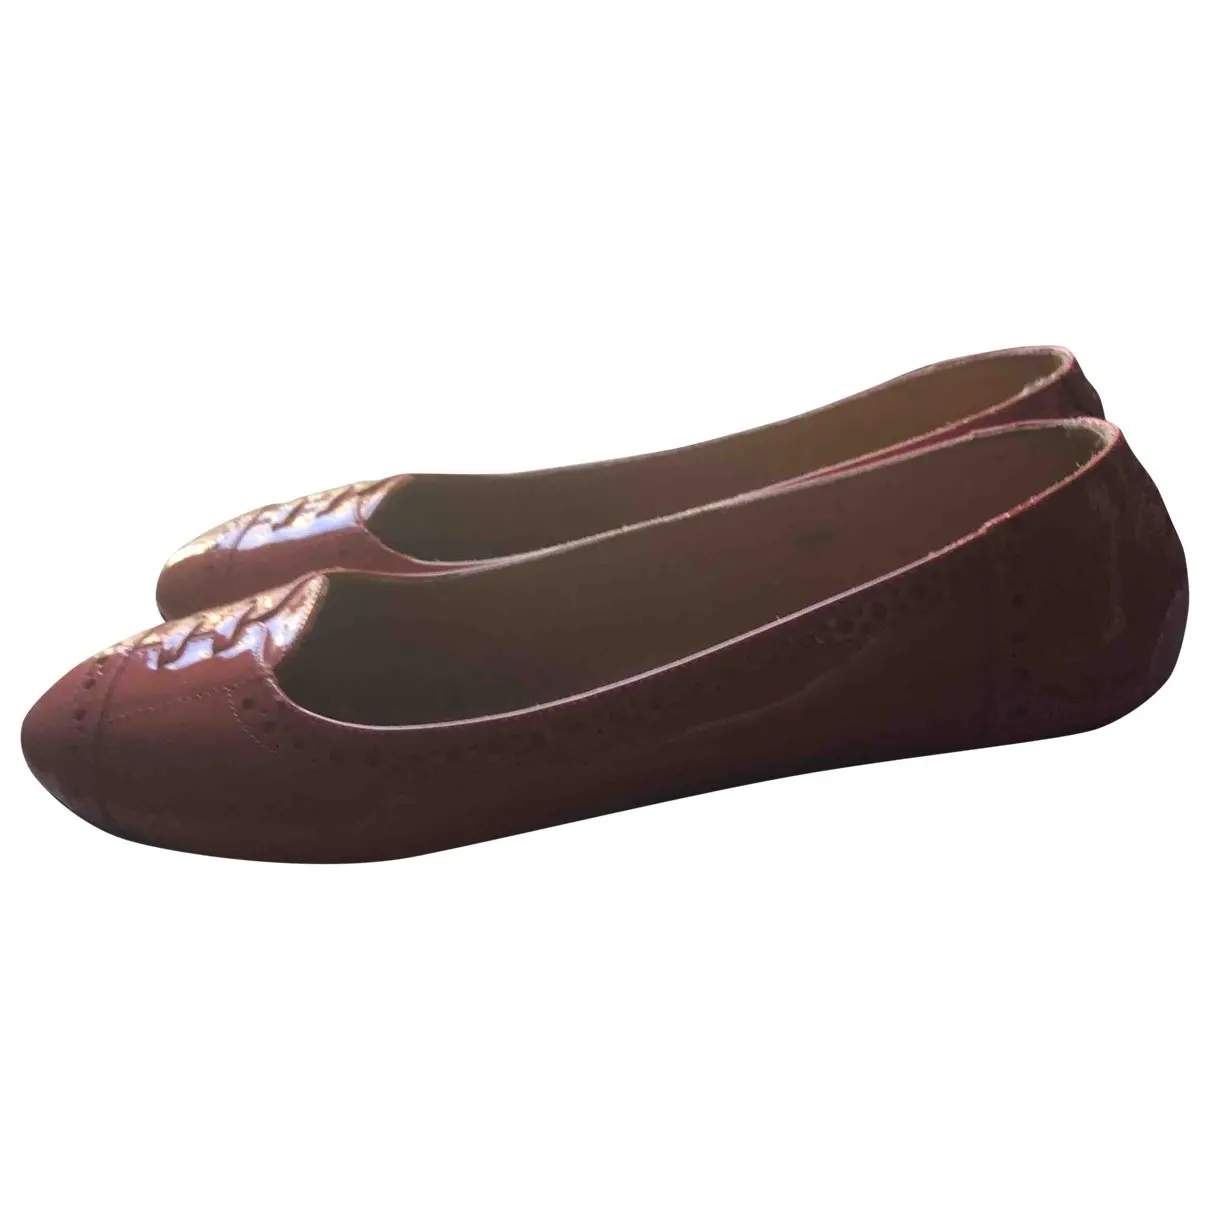 Patent leather ballet flats Robert Clergerie